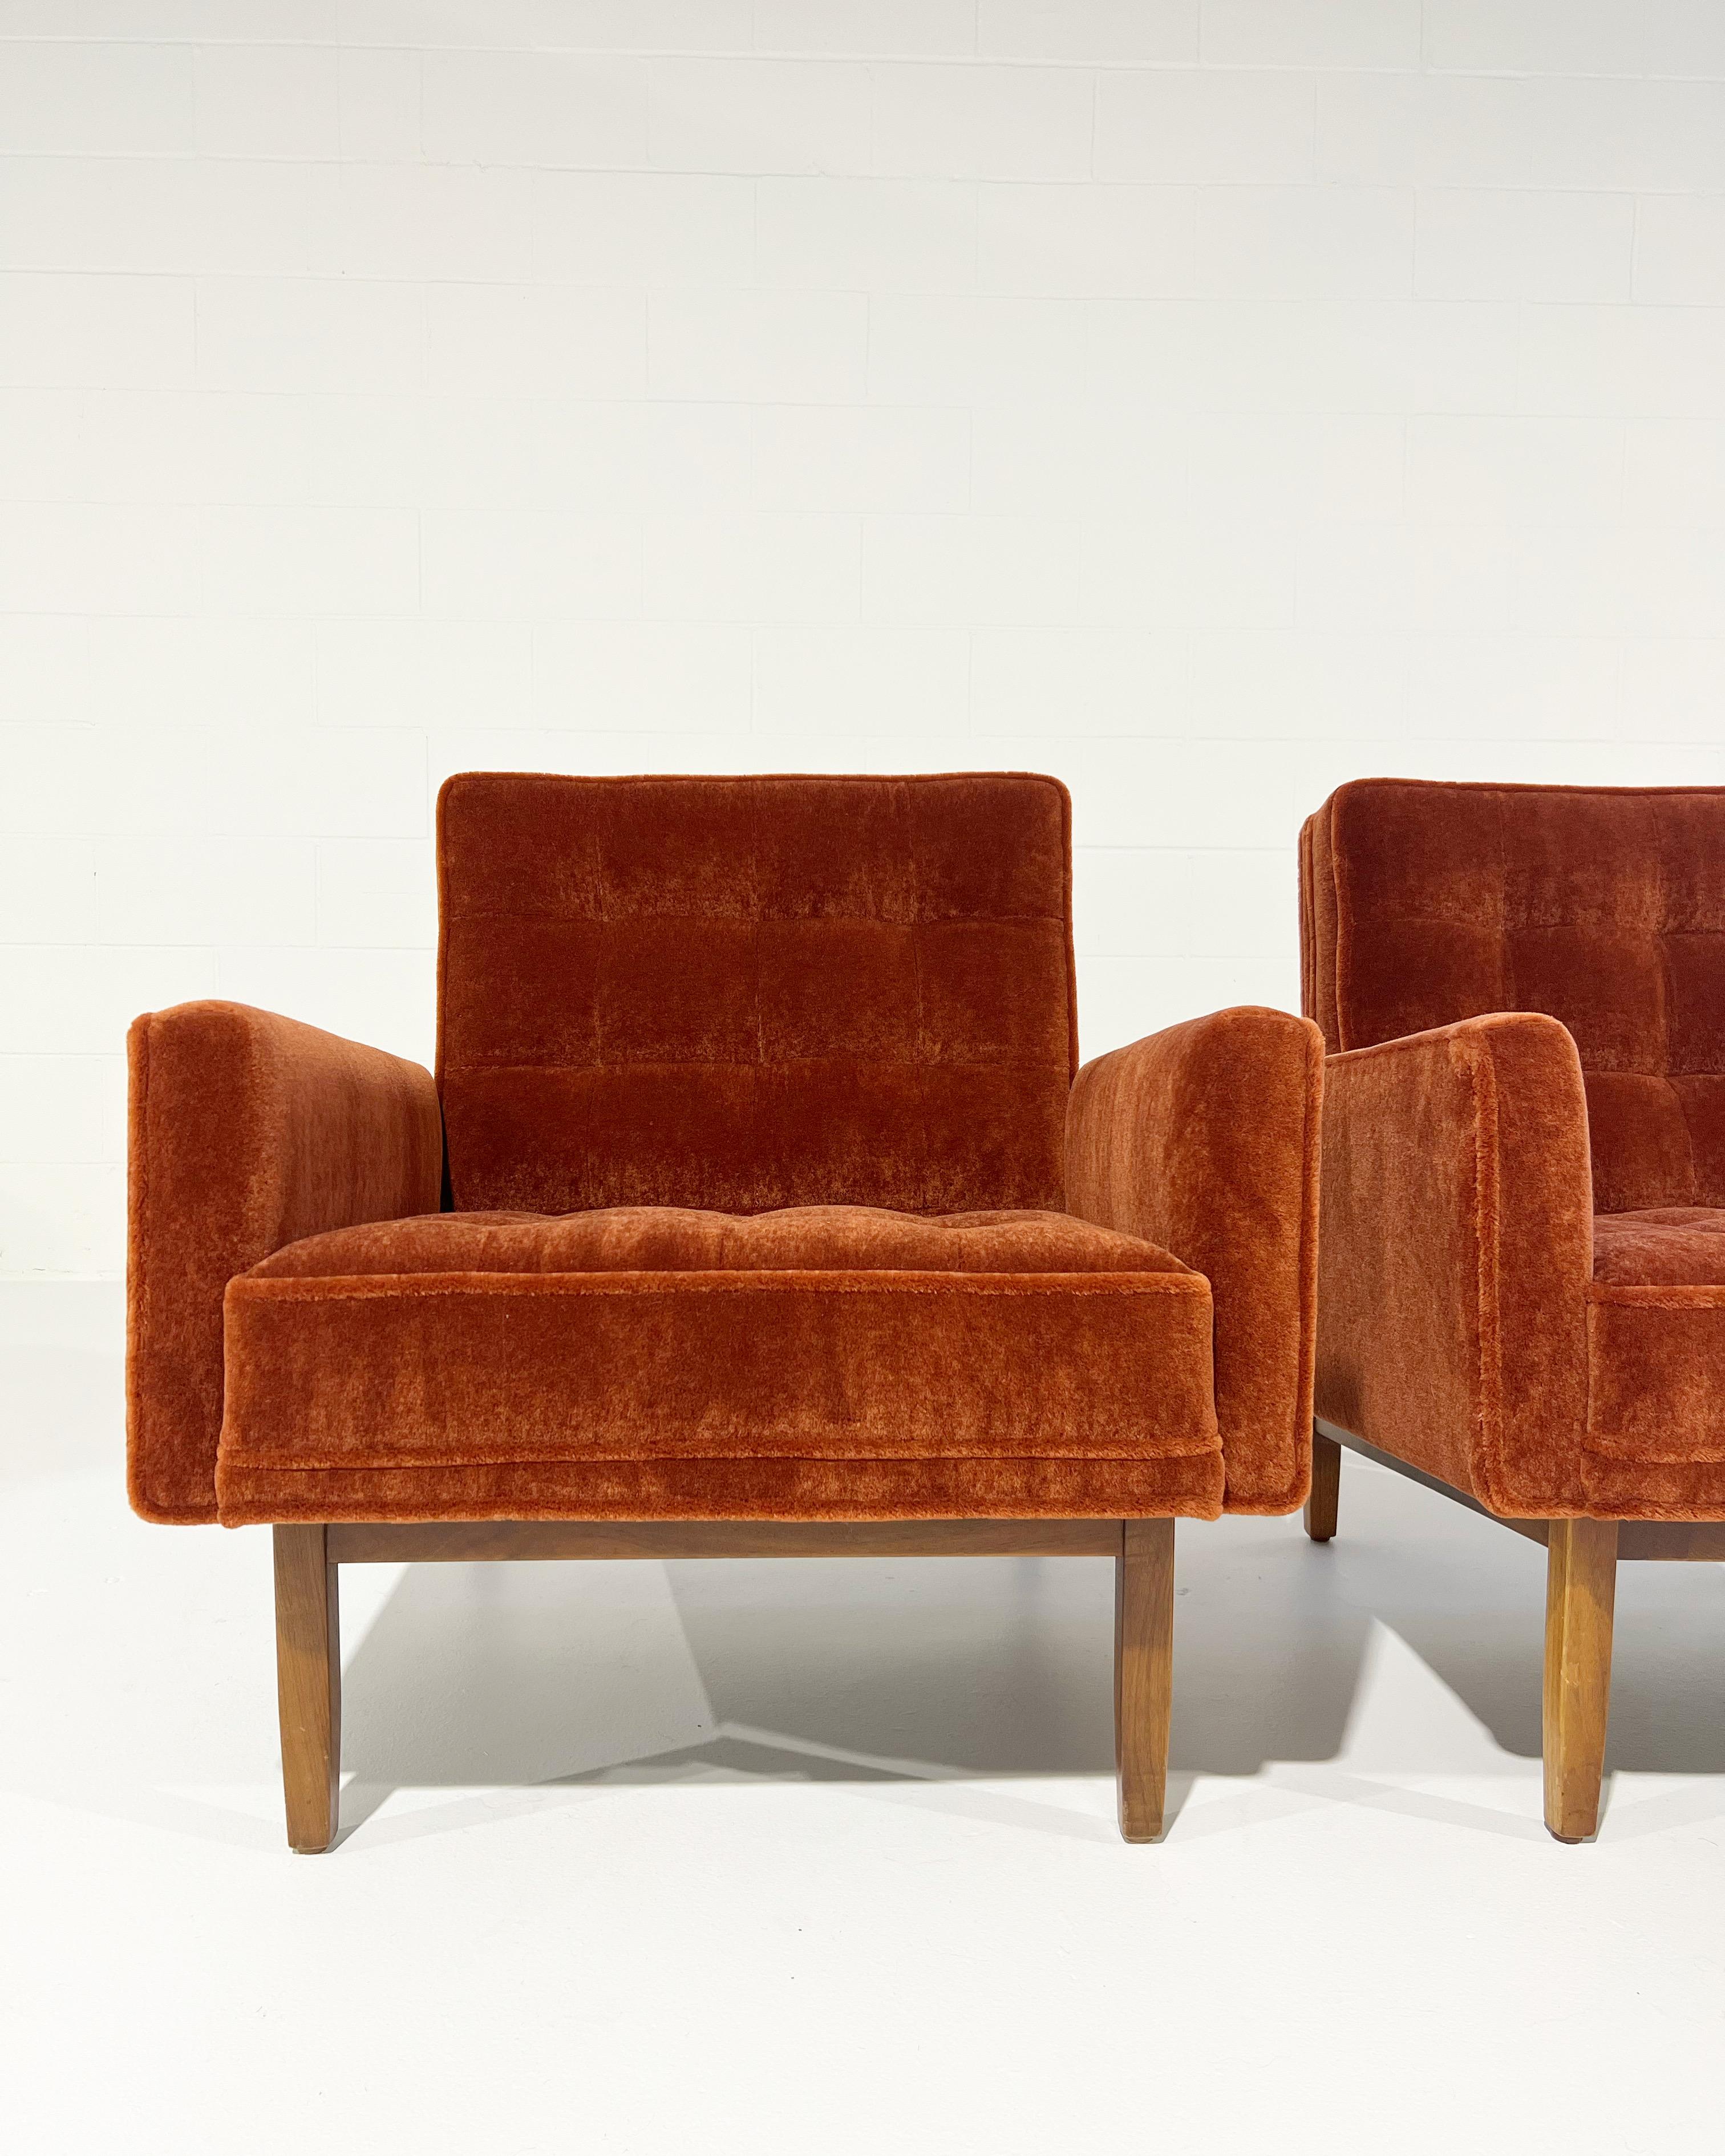 Vintage Restored Florence Knoll Armchairs in Pierre Frey Teddy Mohair For Sale 7